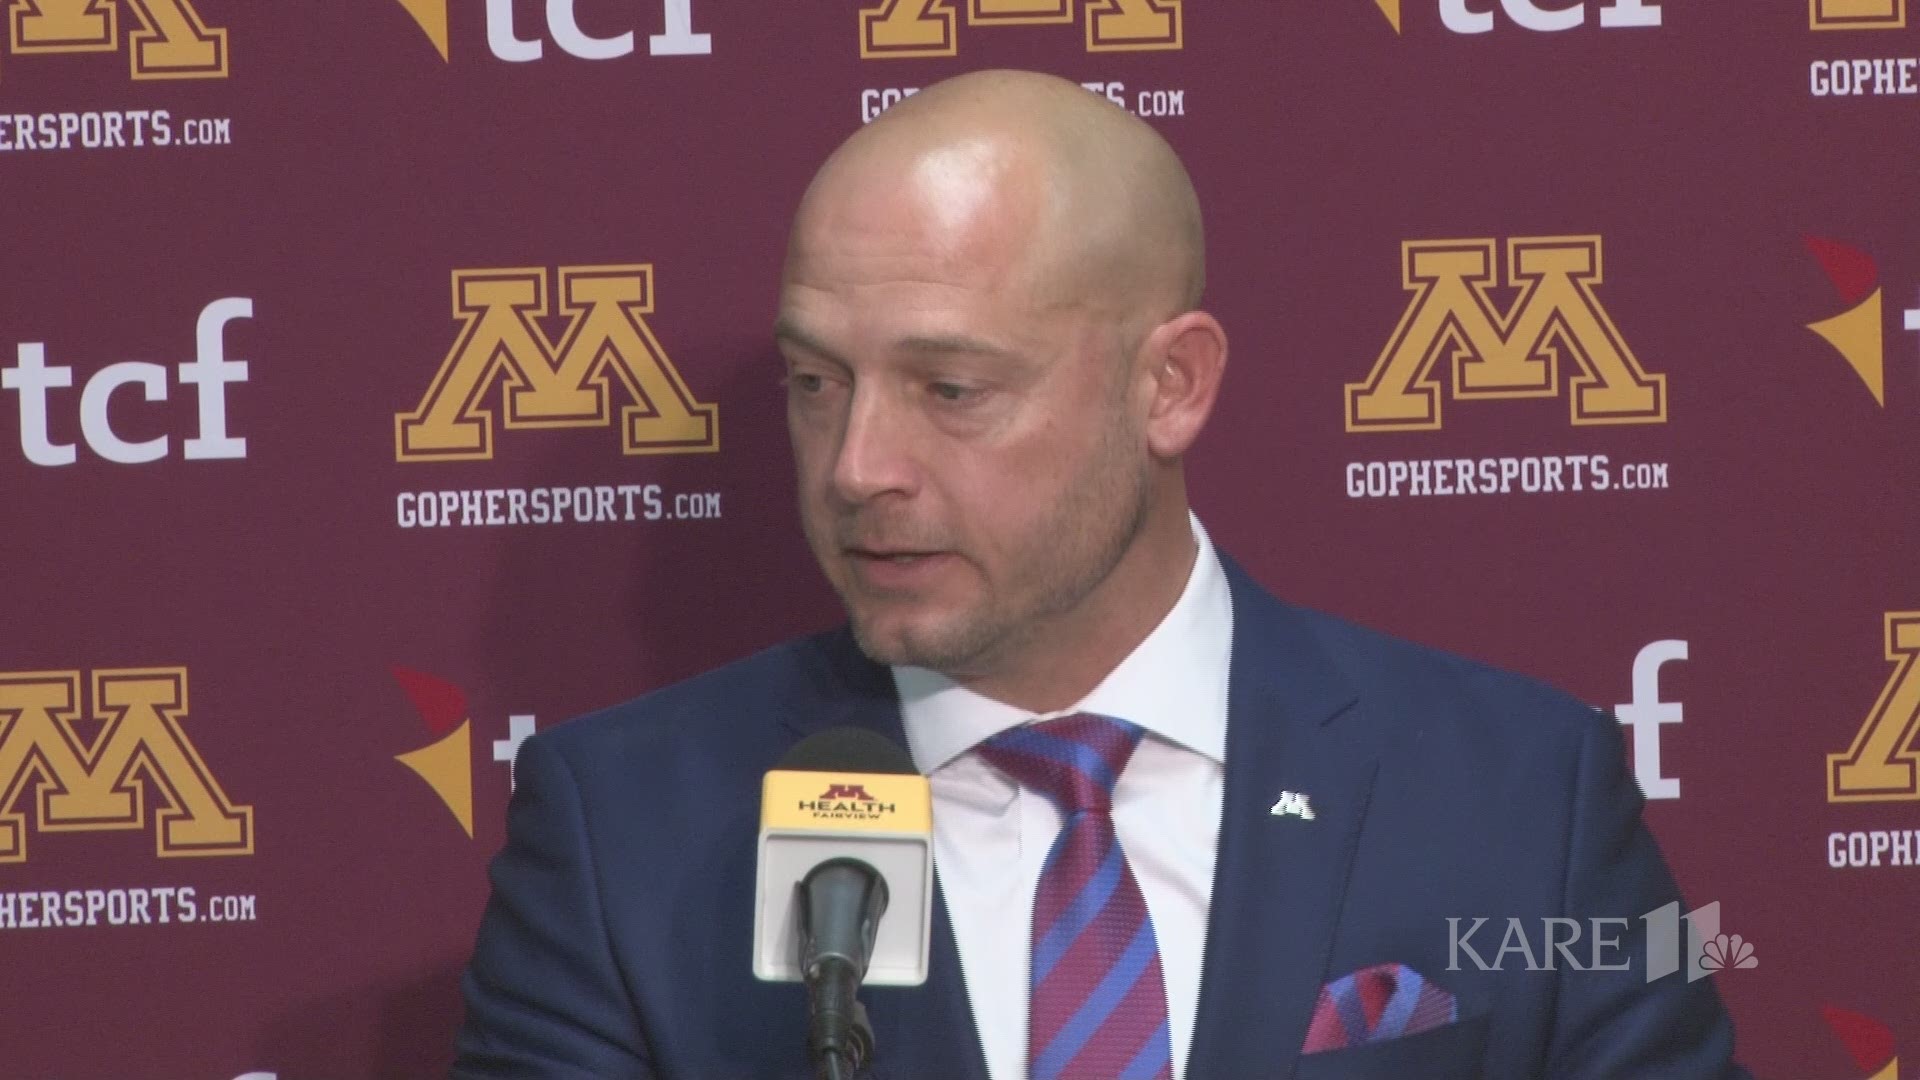 The Gophers head coach agreed to a 7-year contract extension.